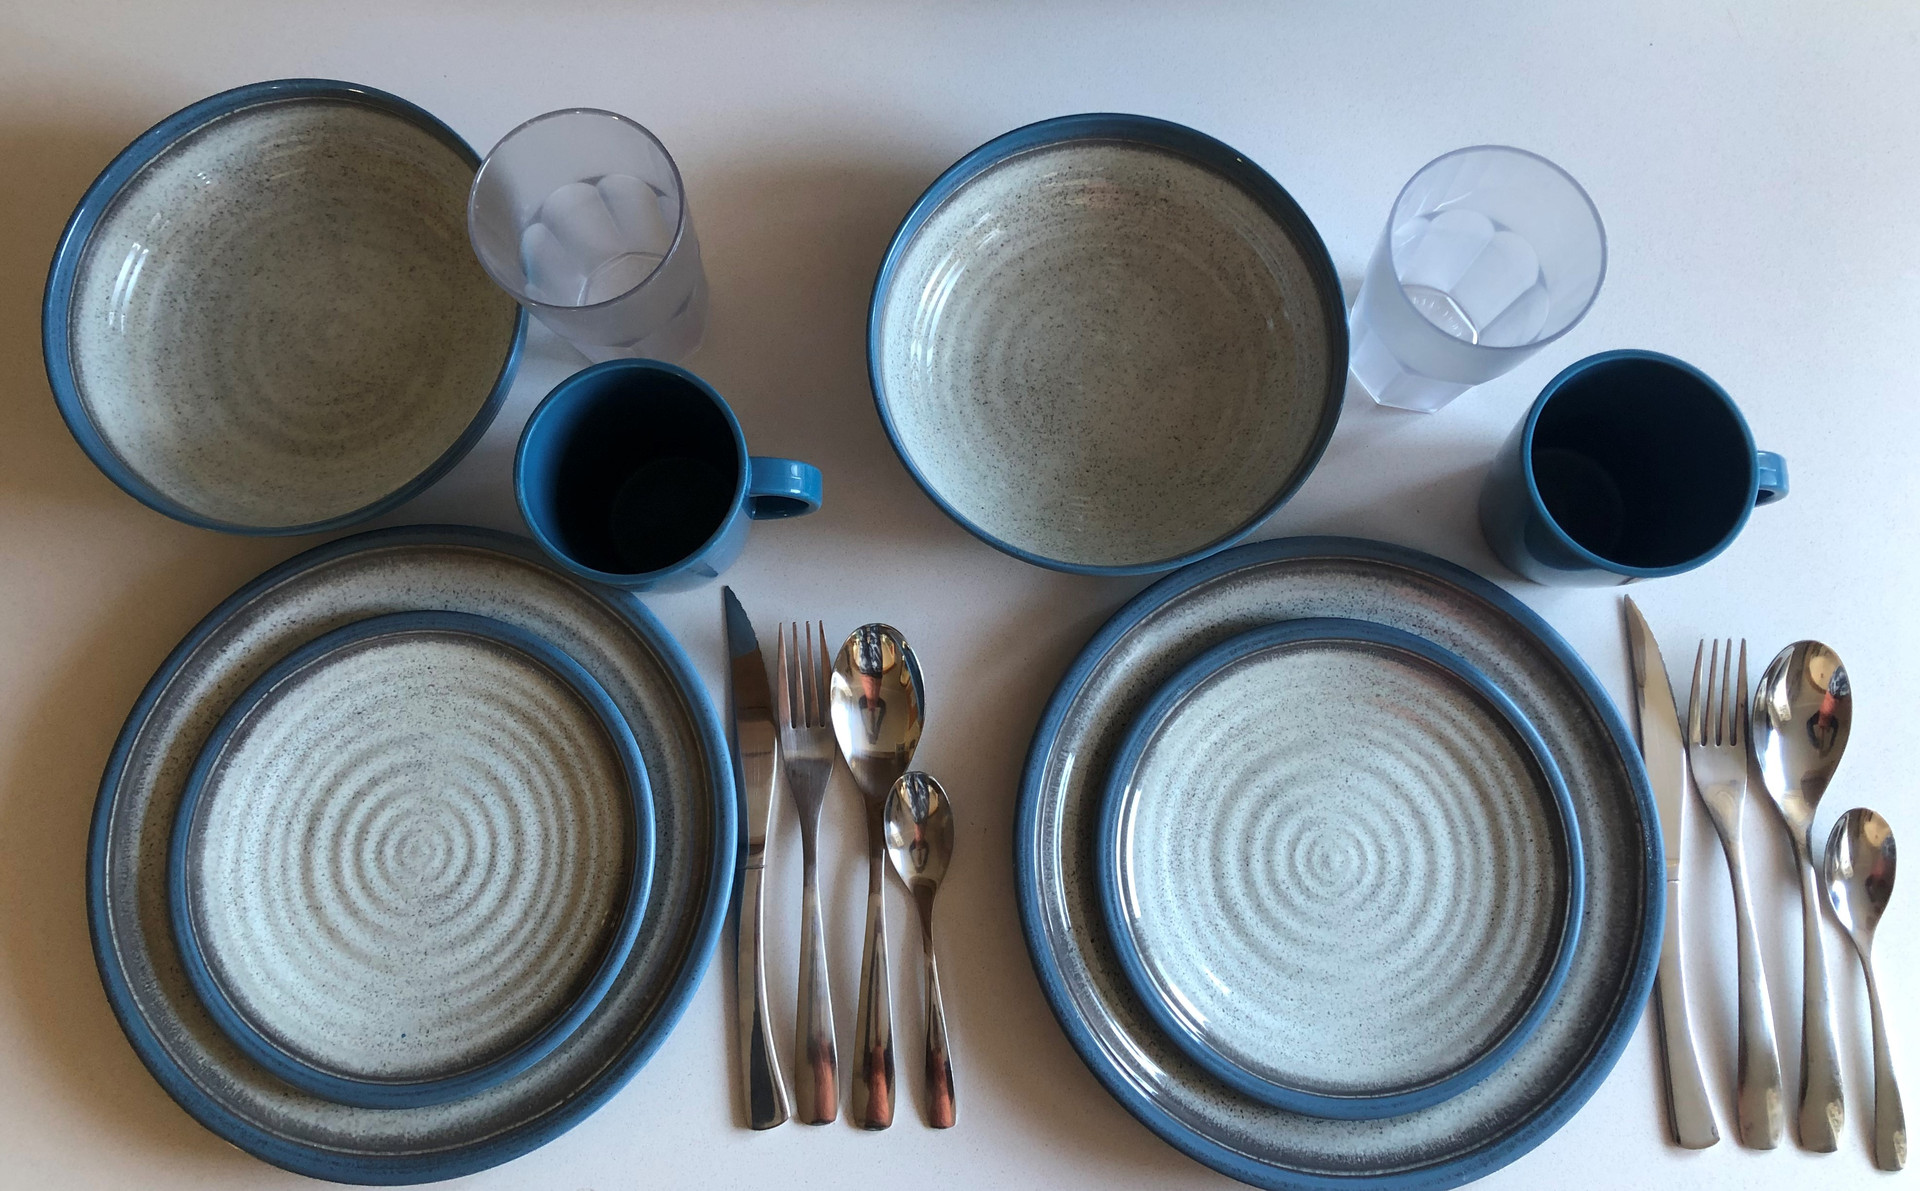 plates and cutlery